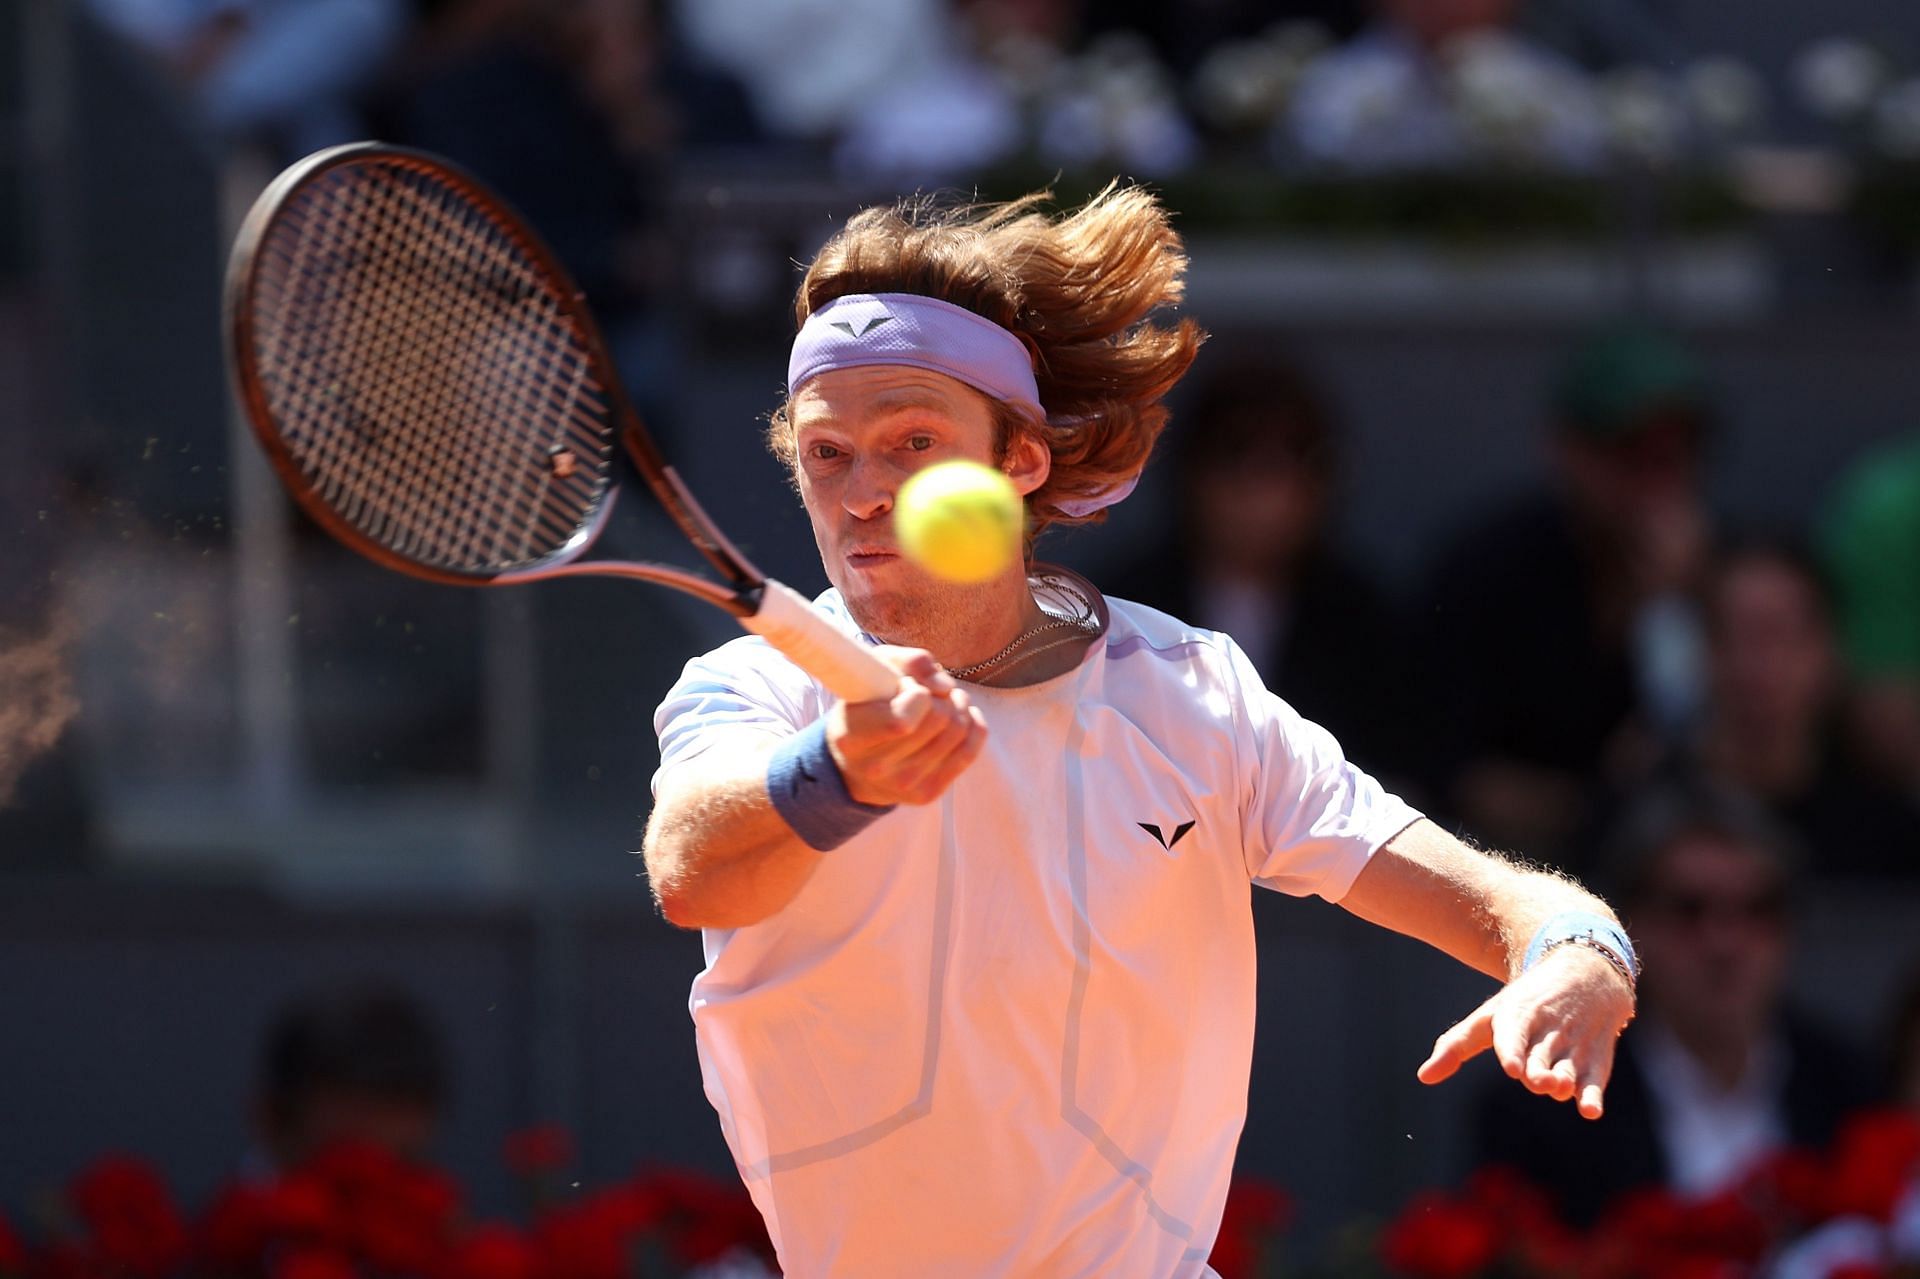 Rublev is looking to reach the last eight in Rome.